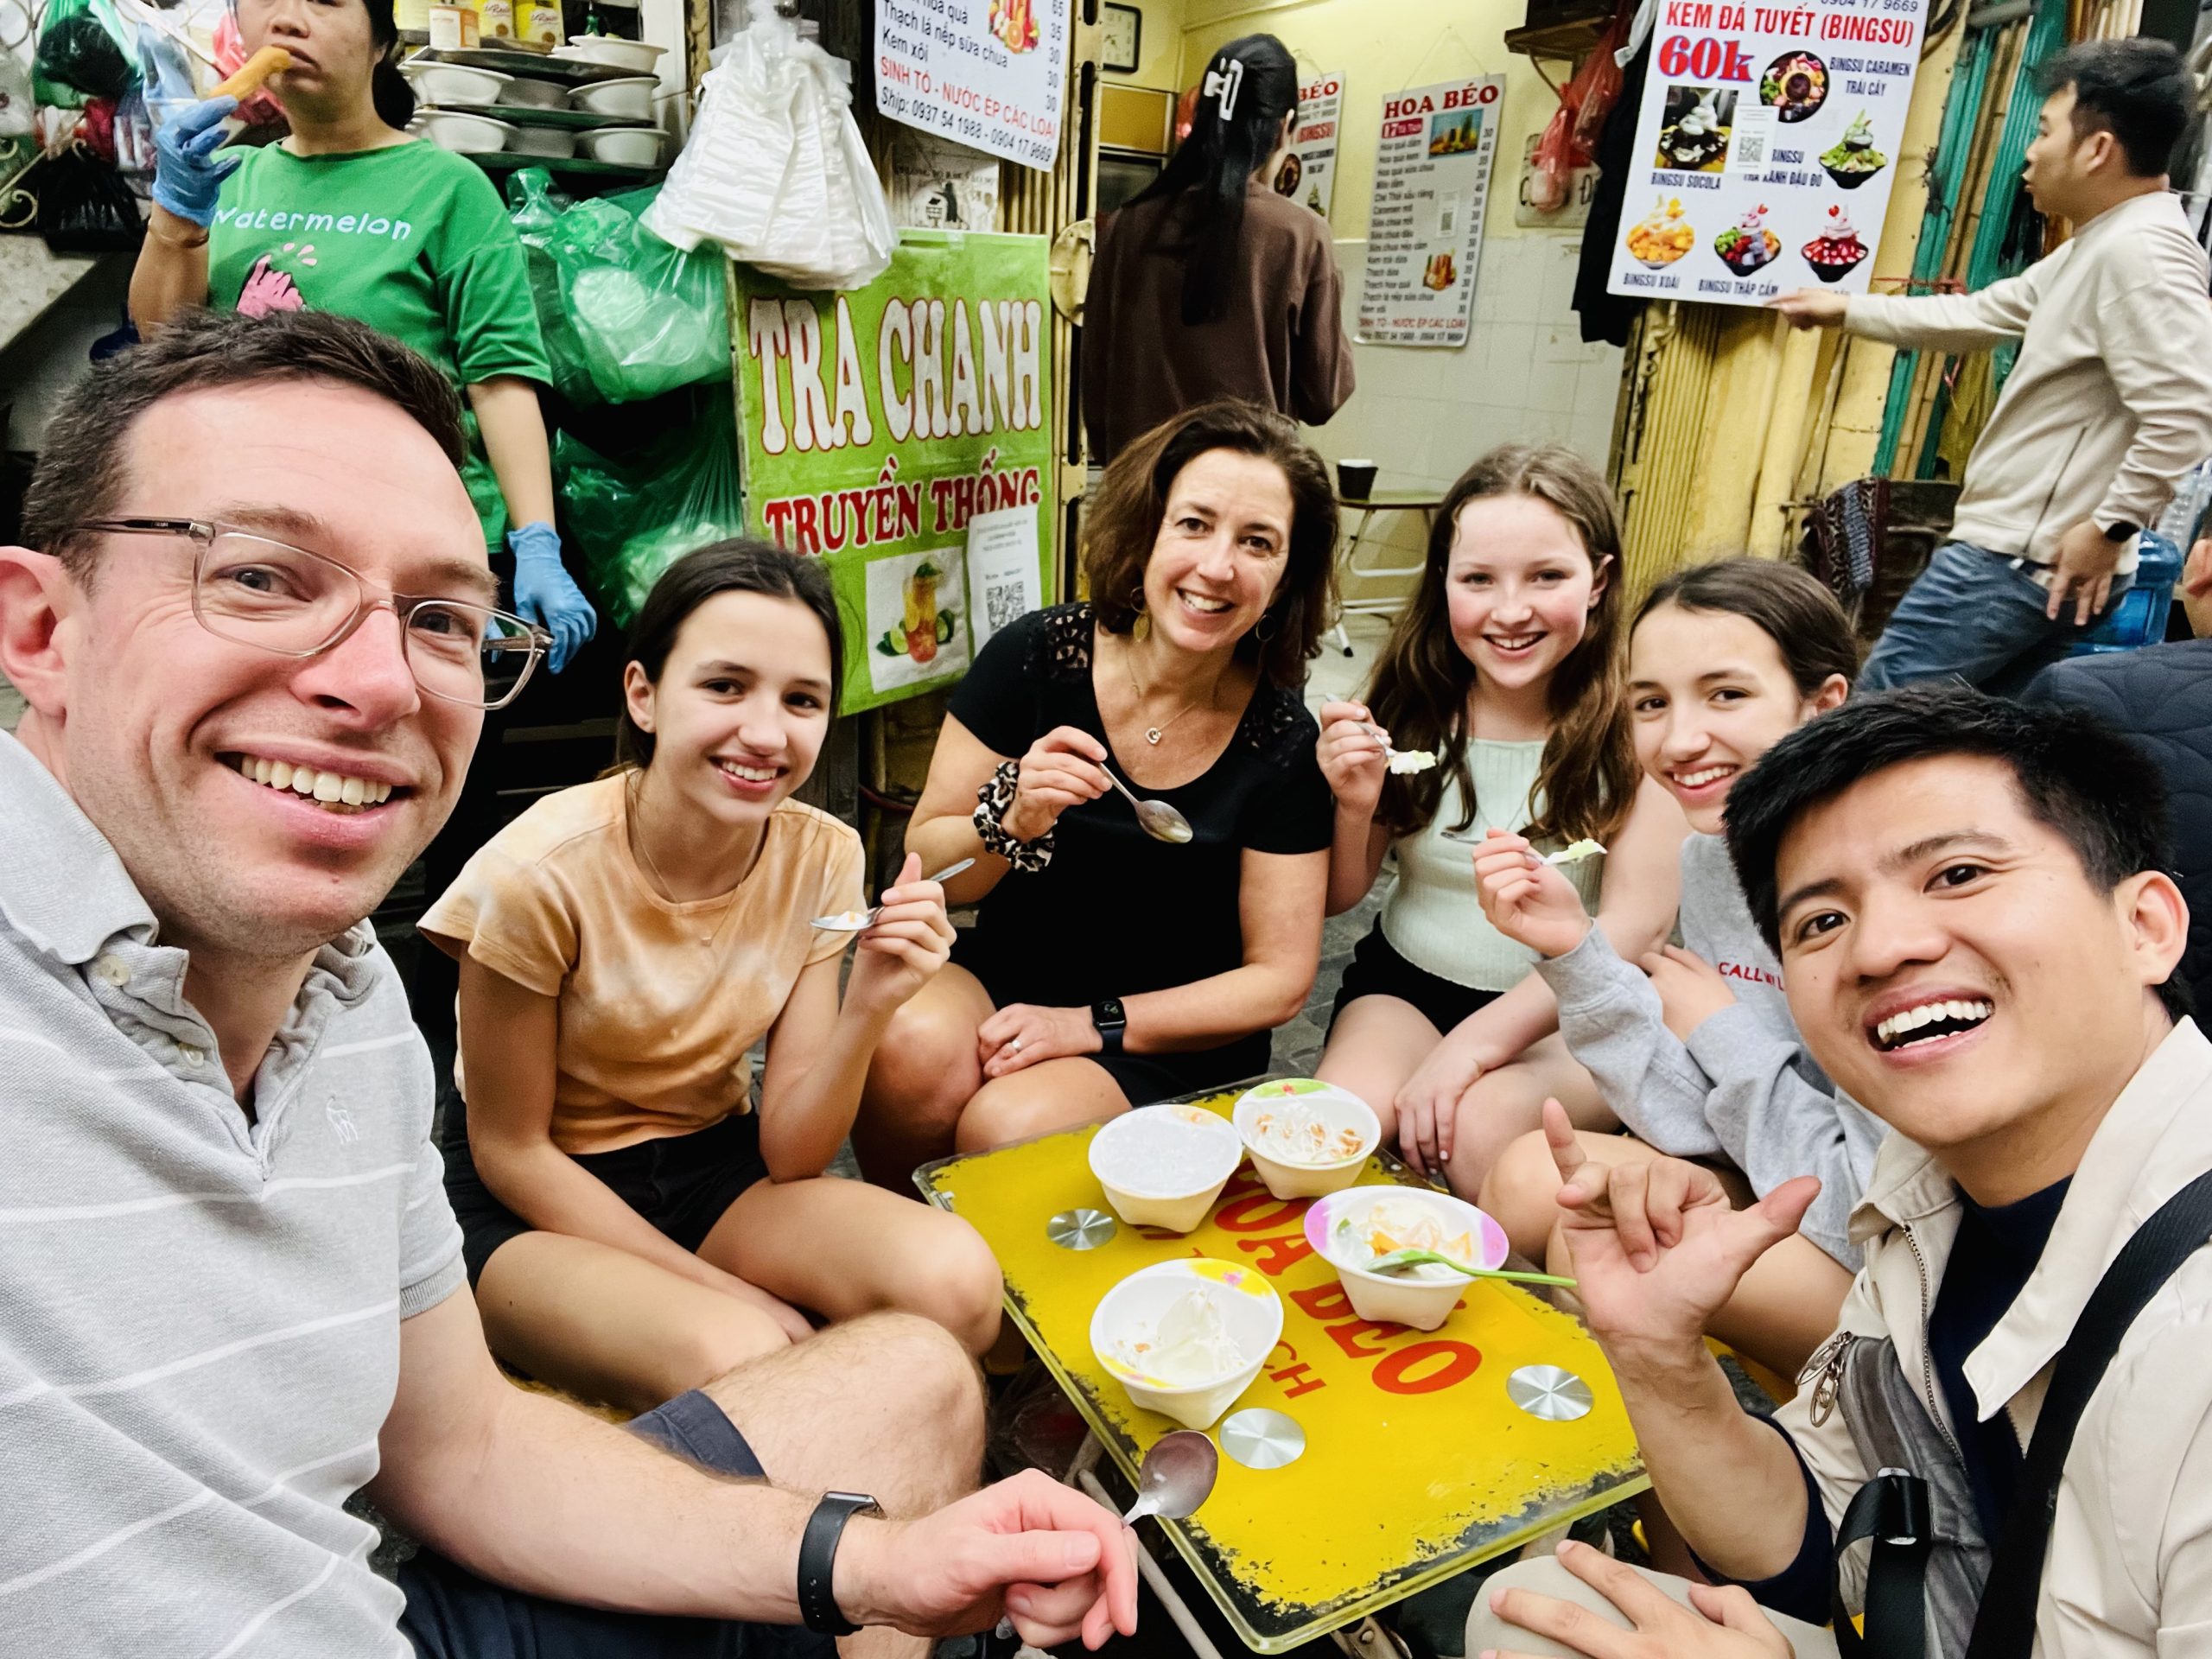 Hanoi Food Walking Tour 1 scaled Vietnam has agreed to extend the validity of e-visas to three months.